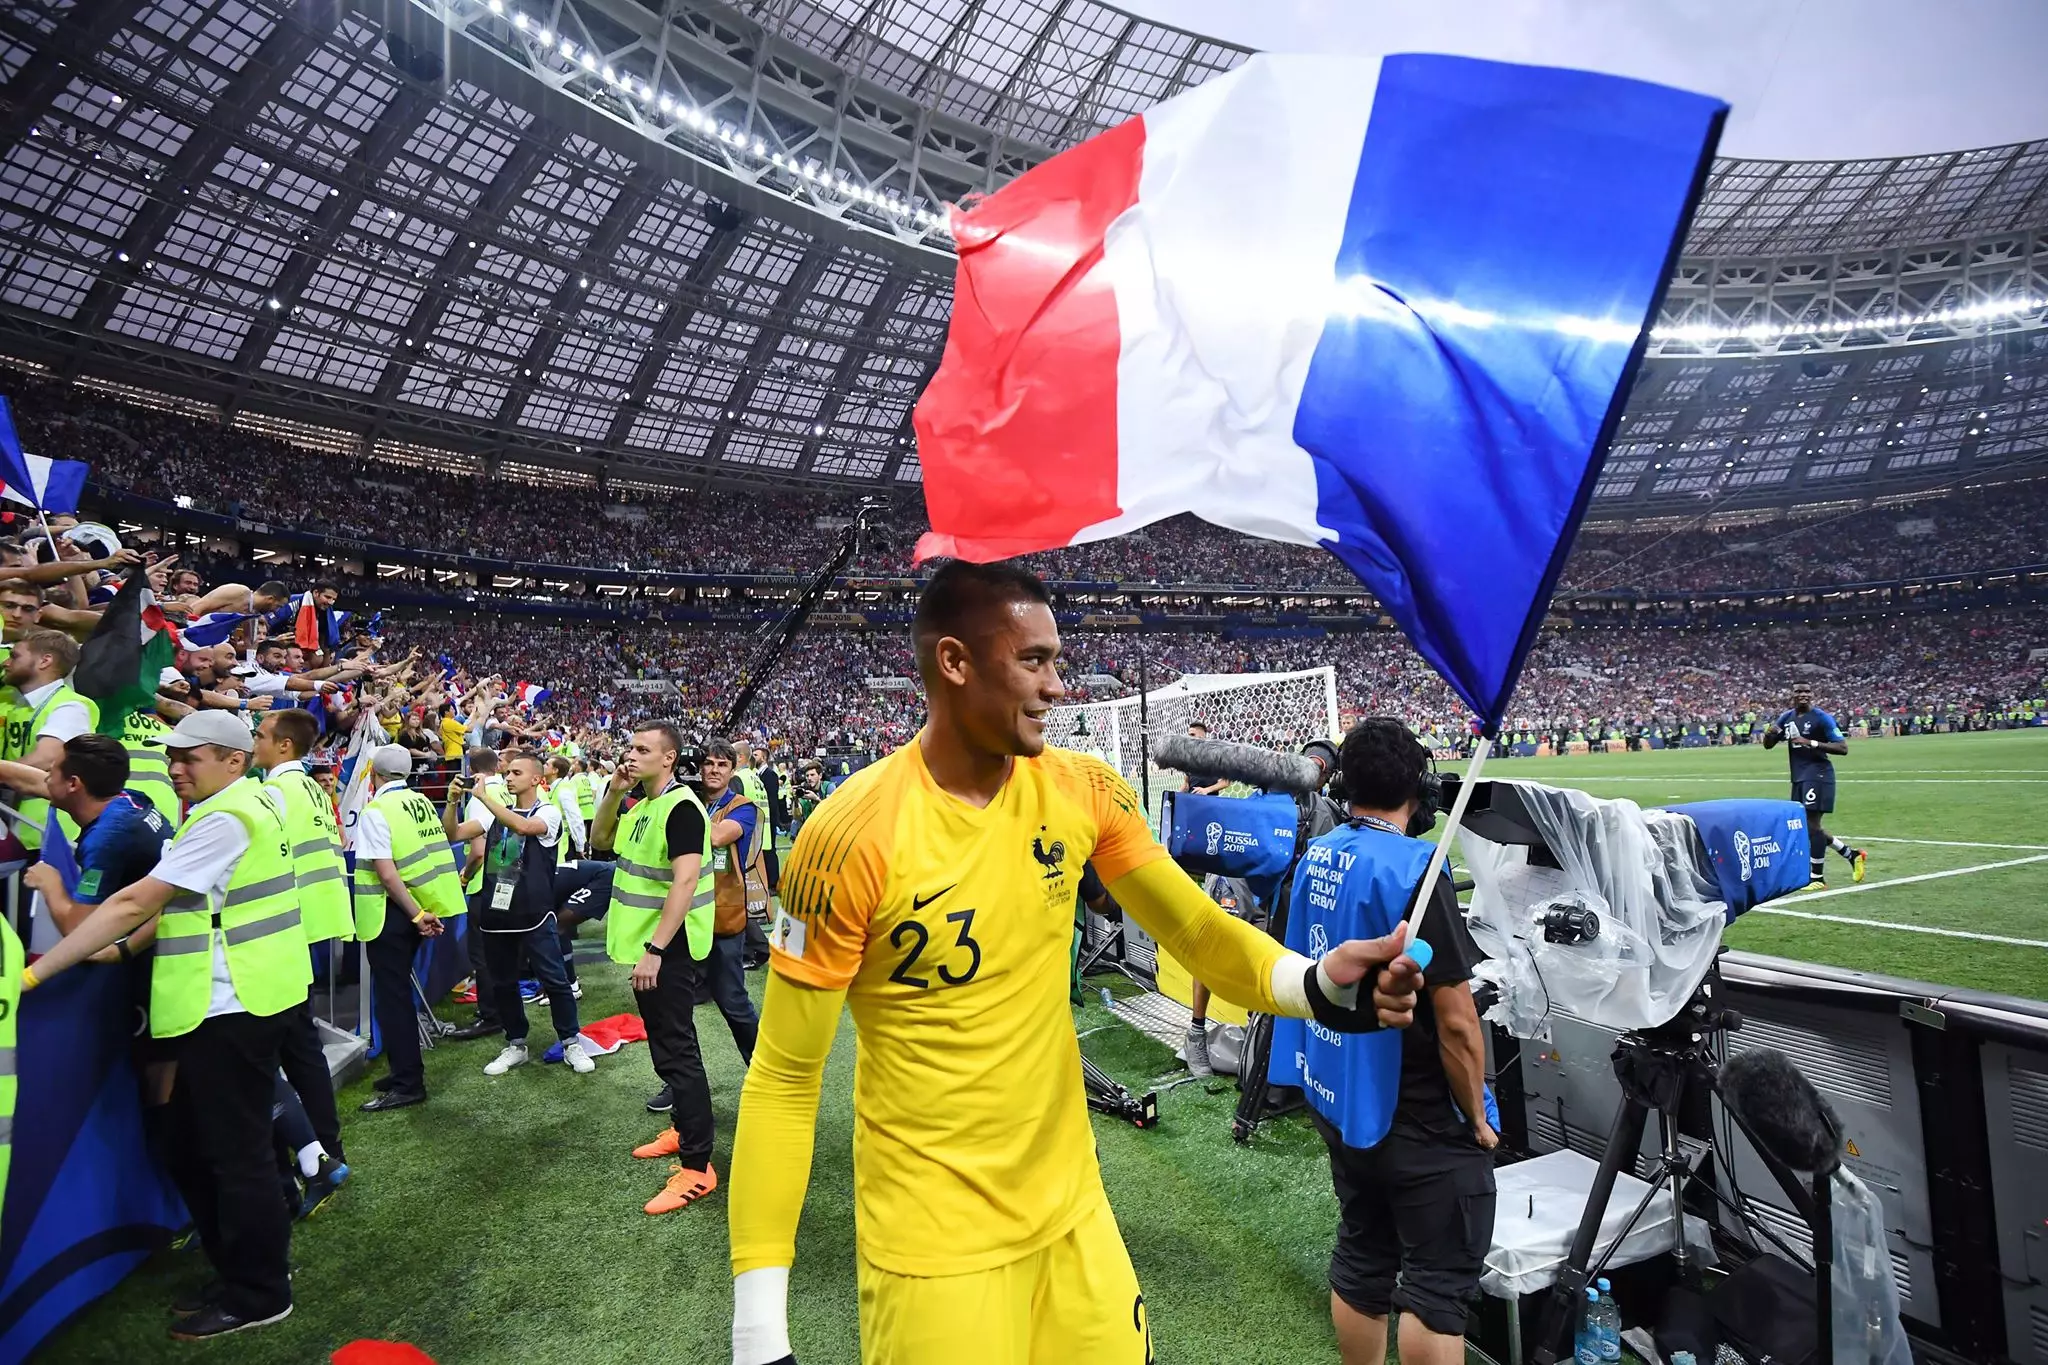 Areola celebrating with the French flag after winning the World Cup. Image: PA Images